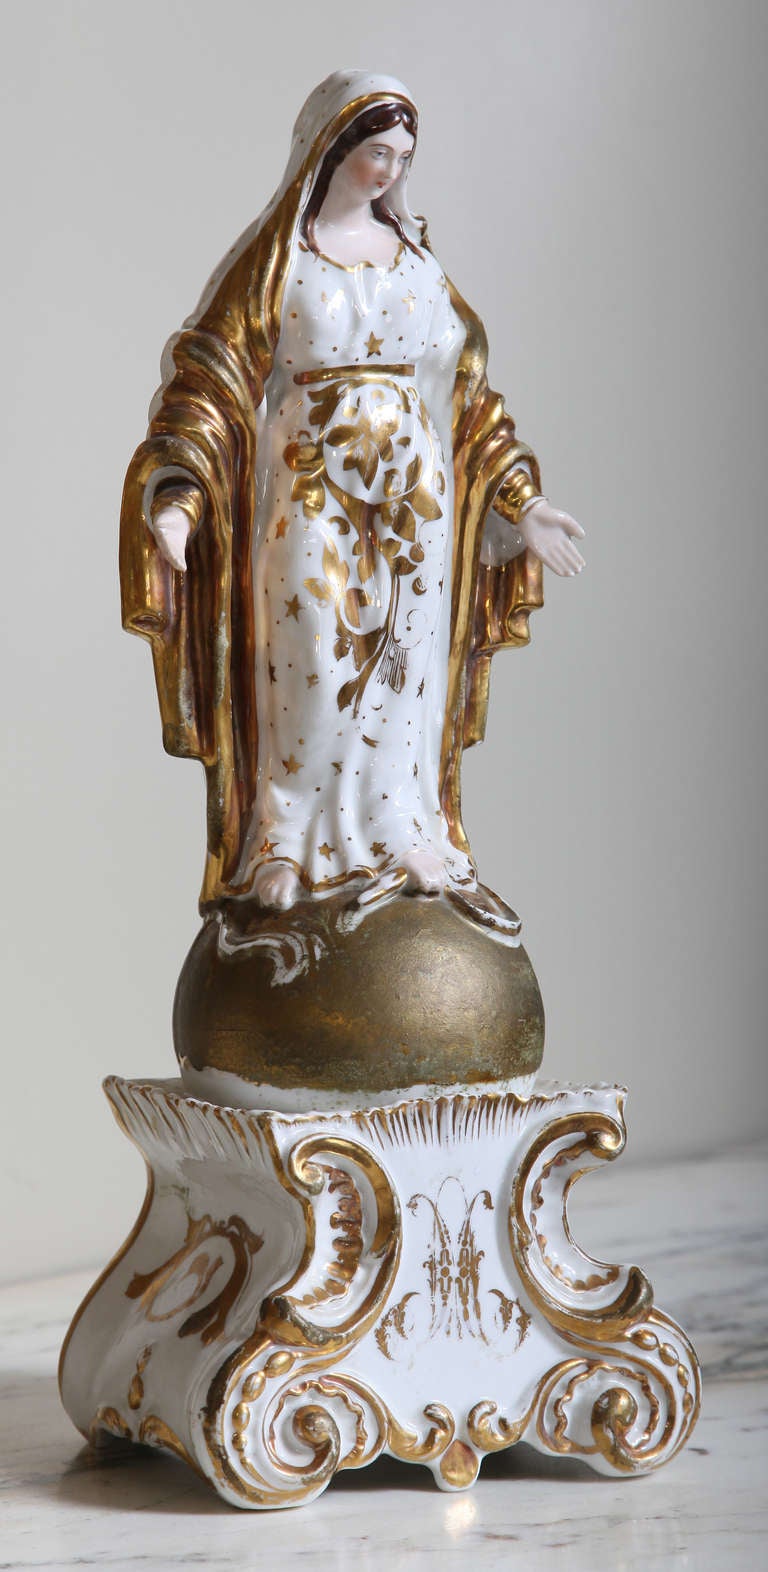 Cast in fine white porcelain, then lovingly hand-painted and accented with gold, then finally glazed and fired to preserve its beauty, this depiction of Madonna on a pedestal is truly a work of the devotee's art.